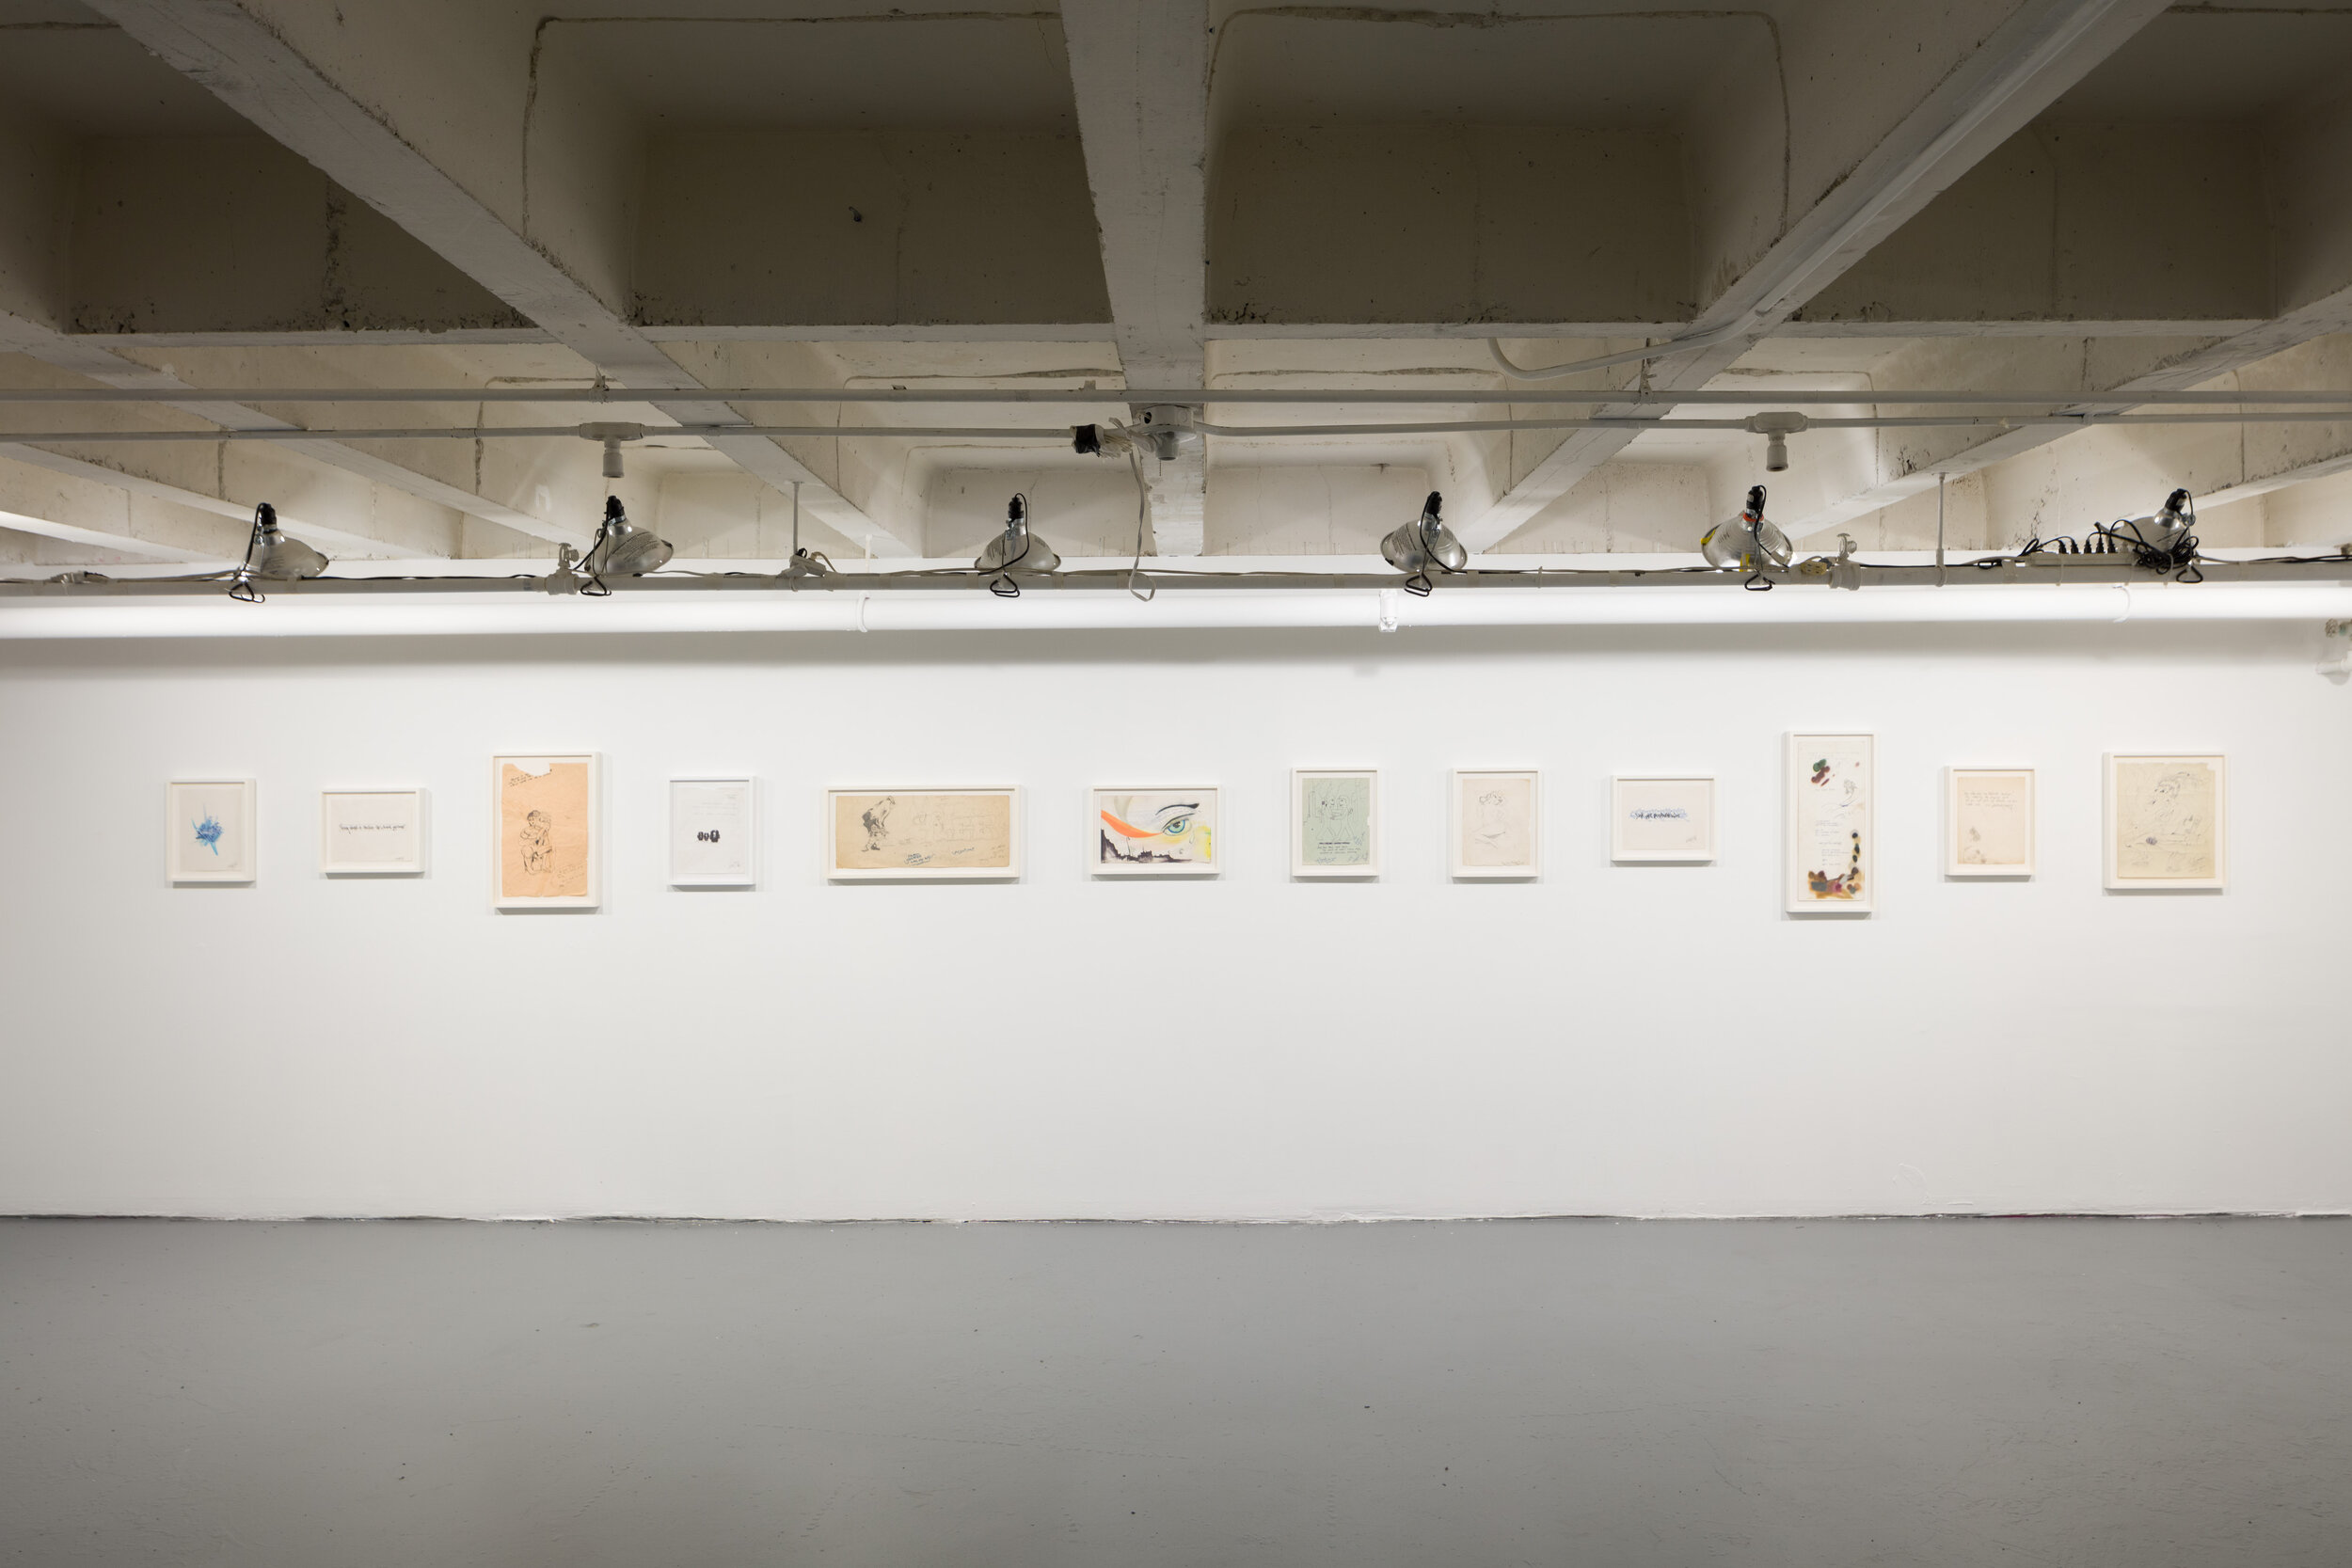  Lee Quiñones,  If These Walls Could Talk , Installation at CJG, January 2019 